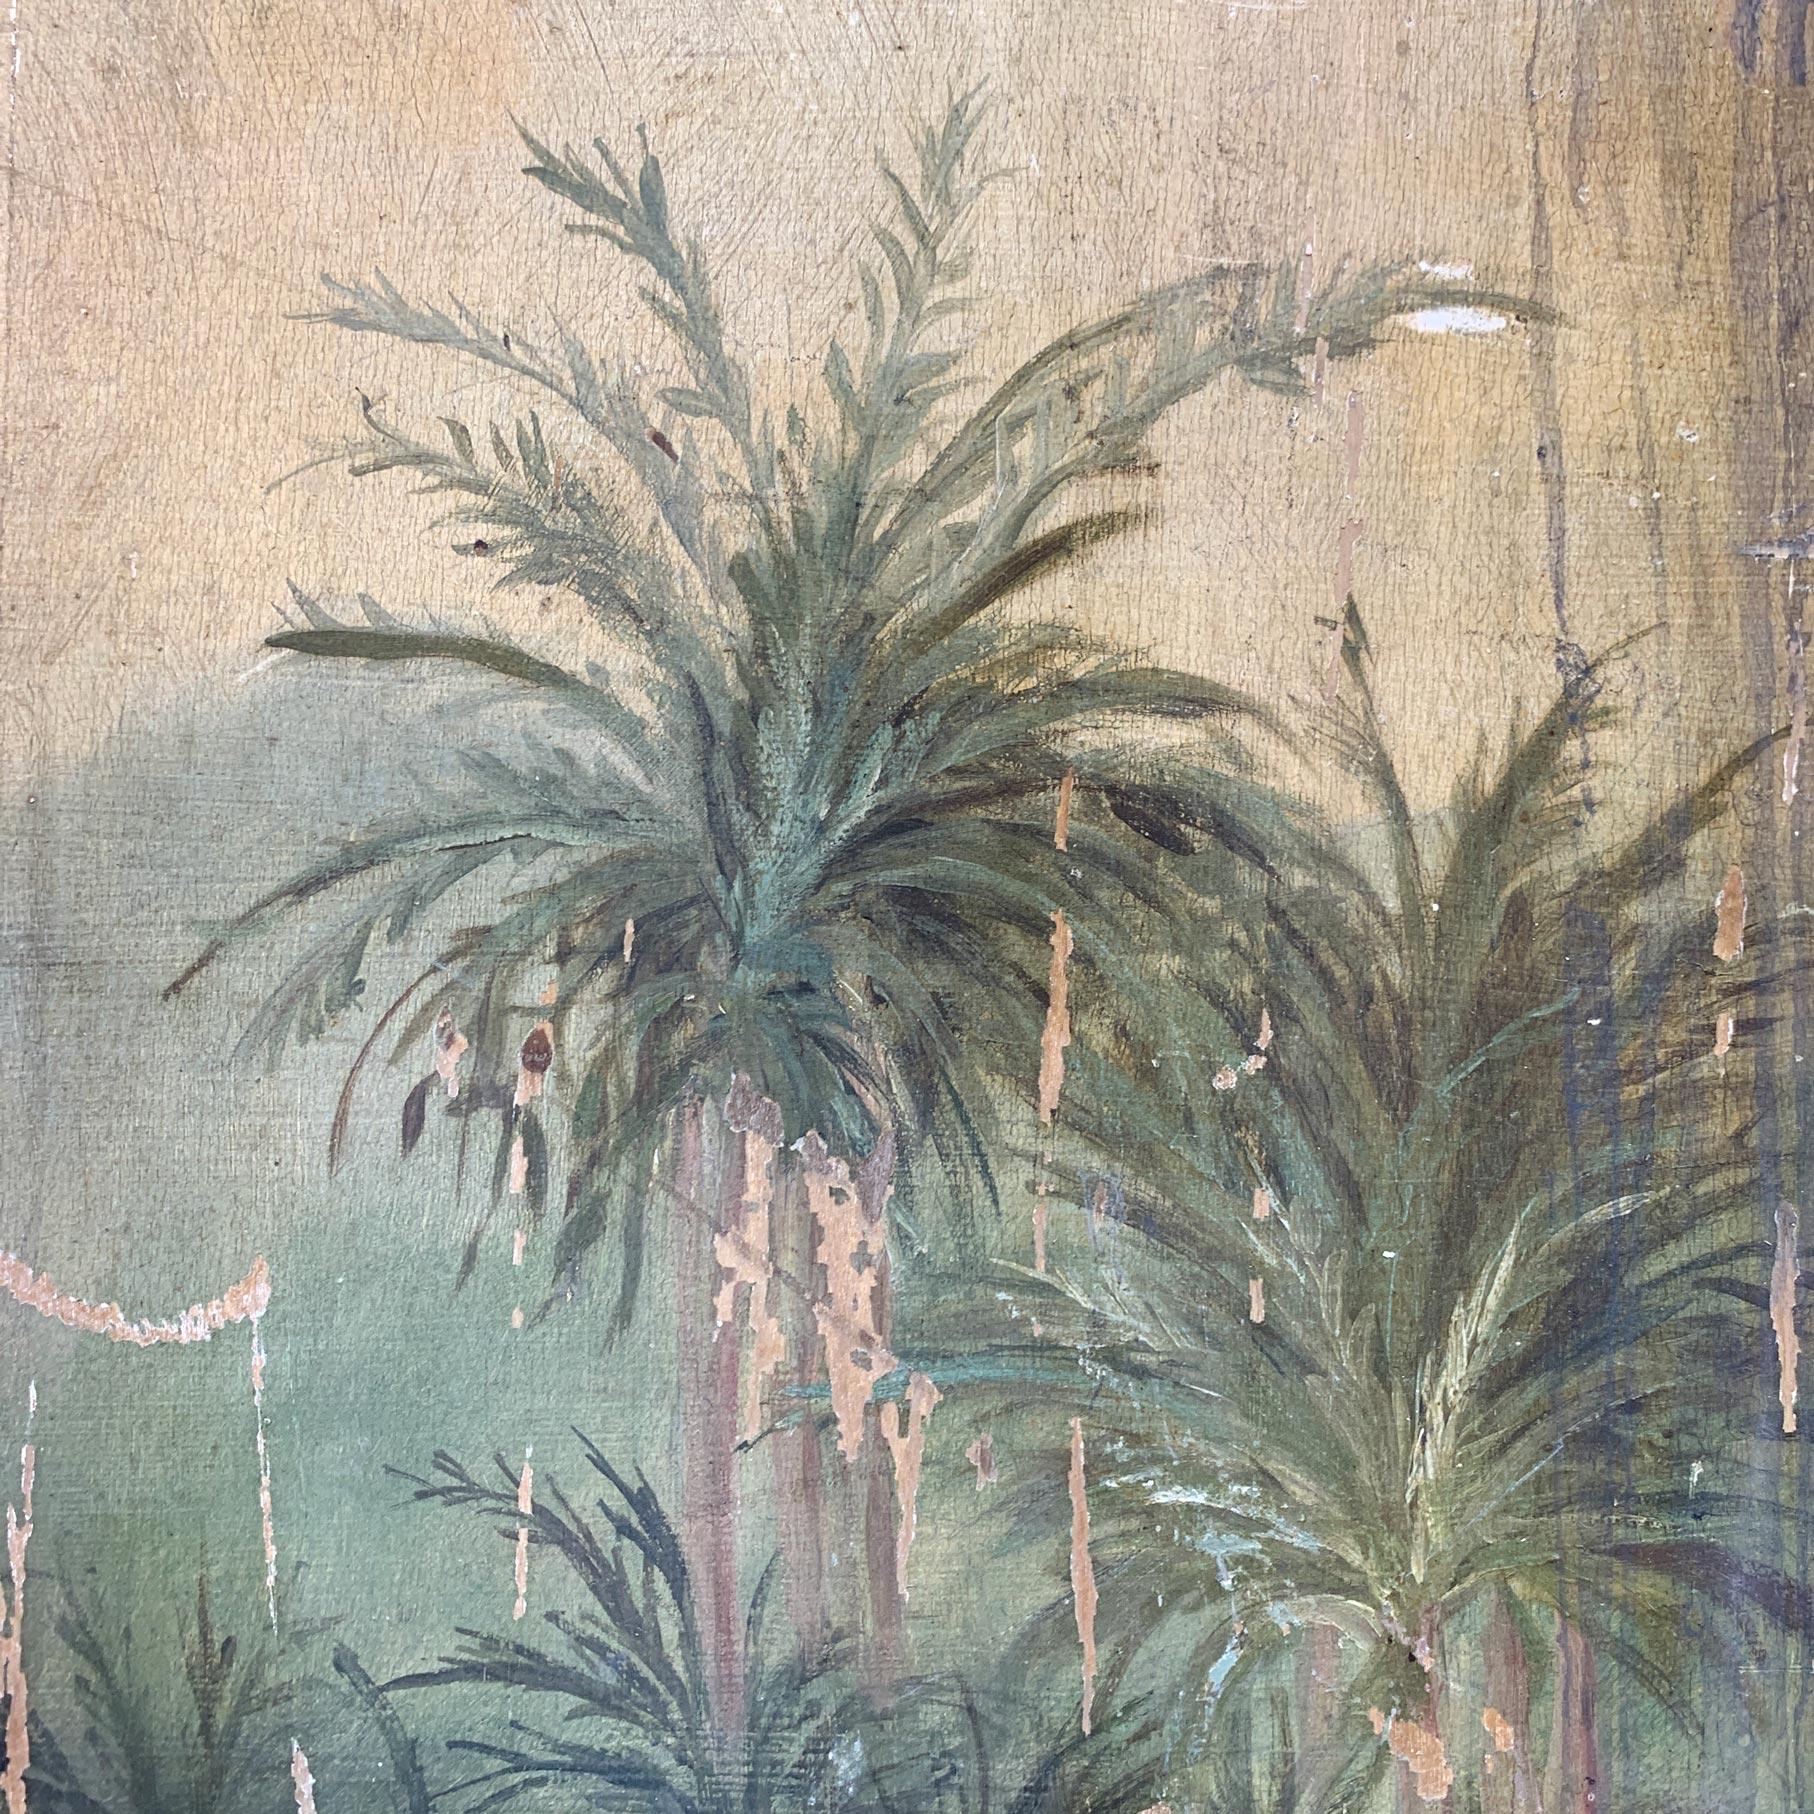 Hand-Painted 19th Century Oil on Board Flamingos in the Tropics